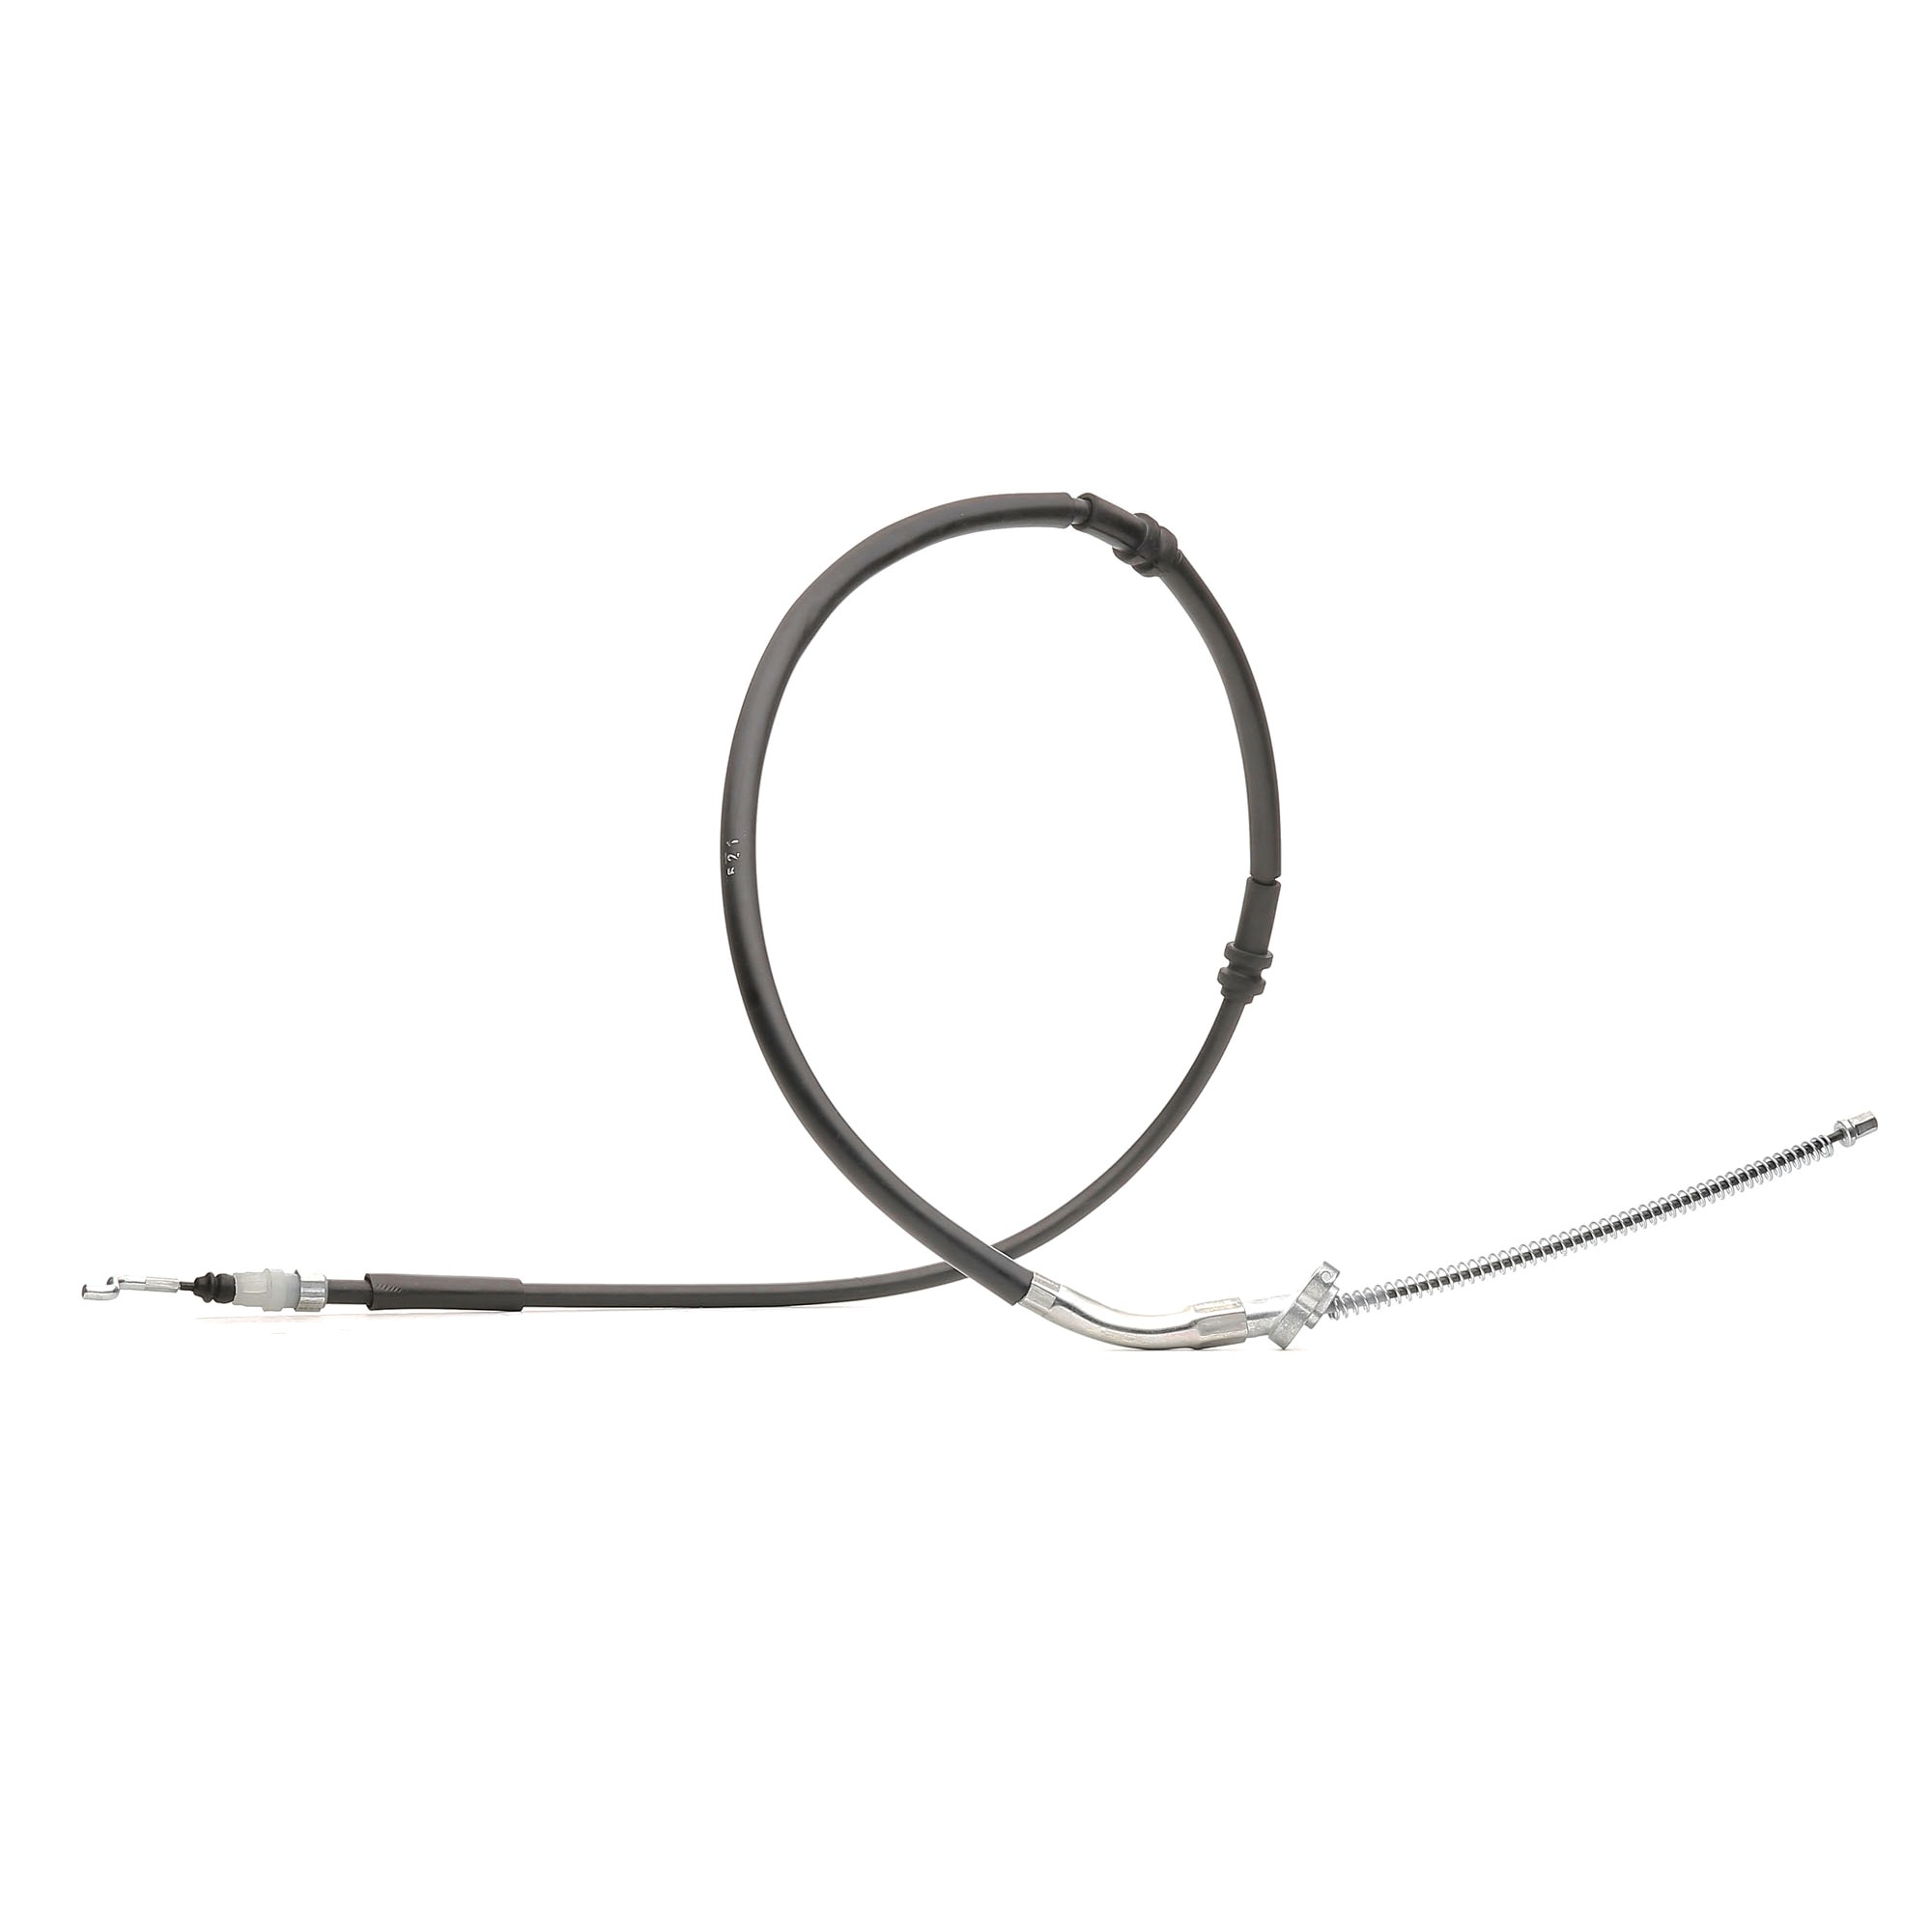 BOSCH 1 987 482 729 Hand brake cable 1594mm